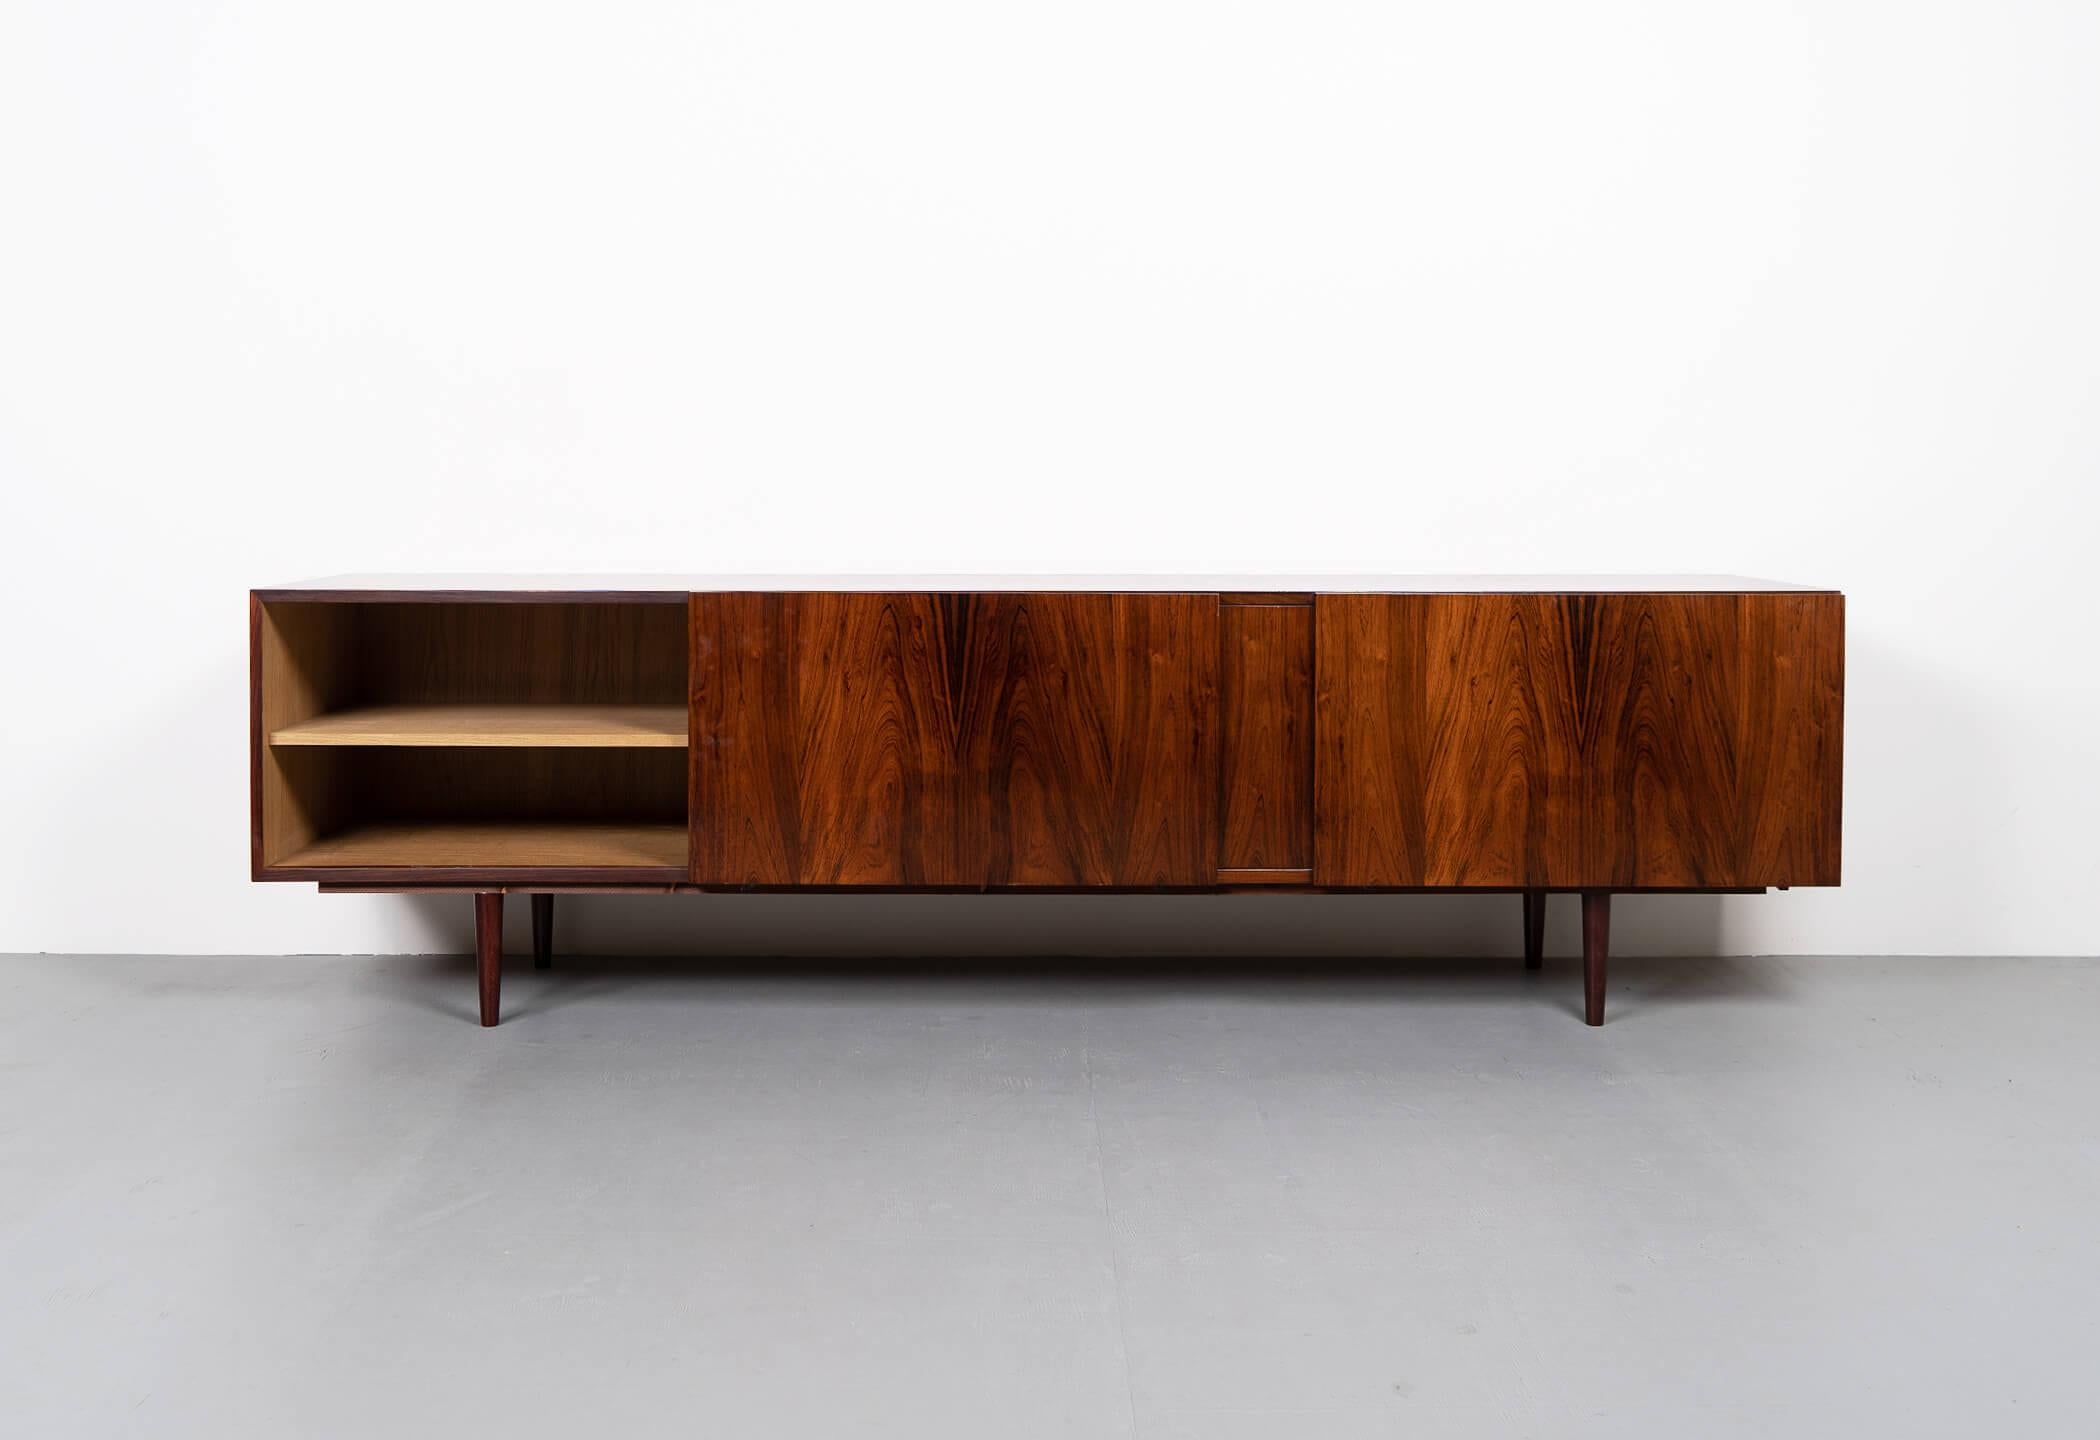 Danish sideboard in rosewood designed by Ib Kofod Larsen. Produced in Denmark for Faarup Møbelfabrik in the 60s. This piece has 3 compartments with sliding doors and adjustable height shelves. The middle compartment features 2 drawers.

Original